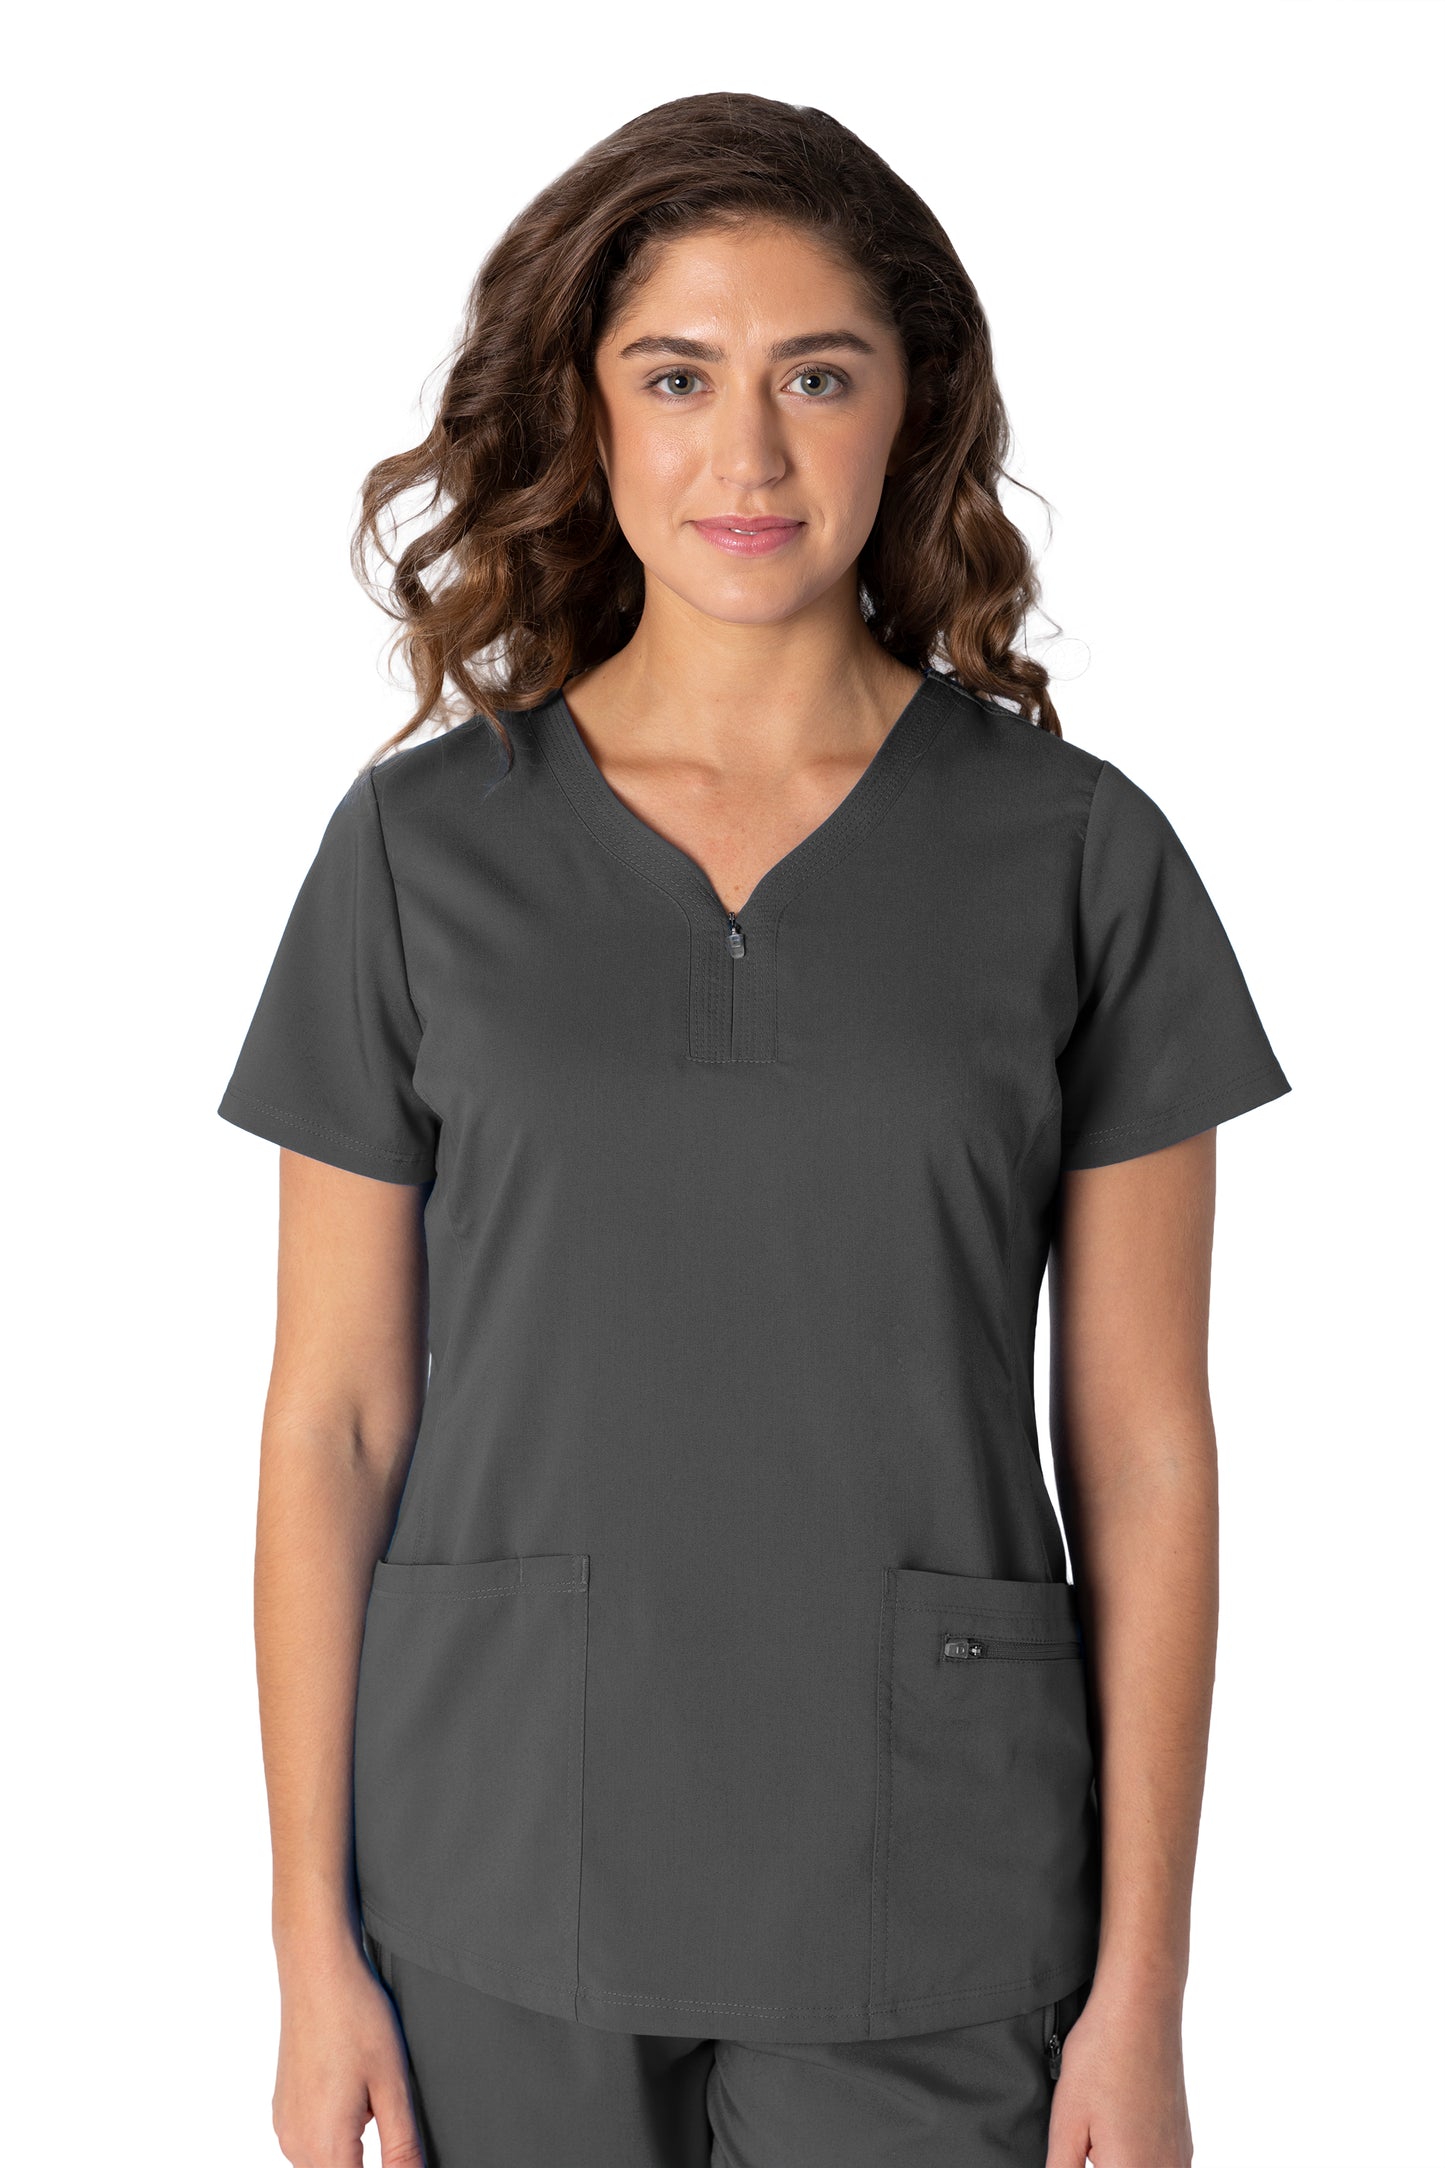 Healing Hands Purple Label Jeni Scrub Top in Pewter at Parker's Clothing and Shoes.